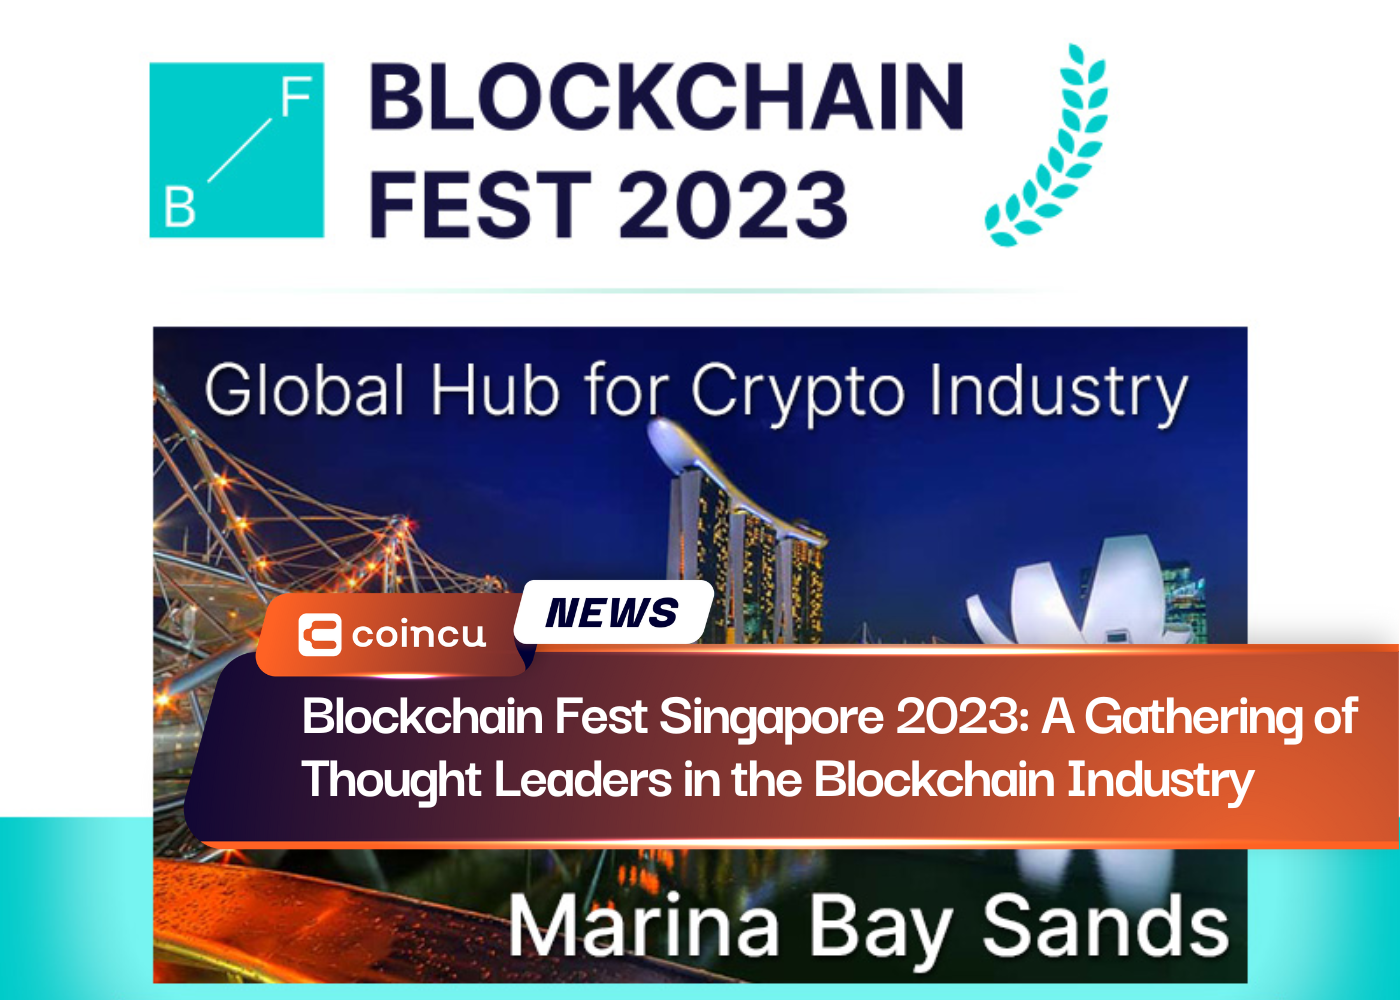 Blockchain Fest Singapore 2023: A Gathering of Thought Leaders in the Blockchain Industry